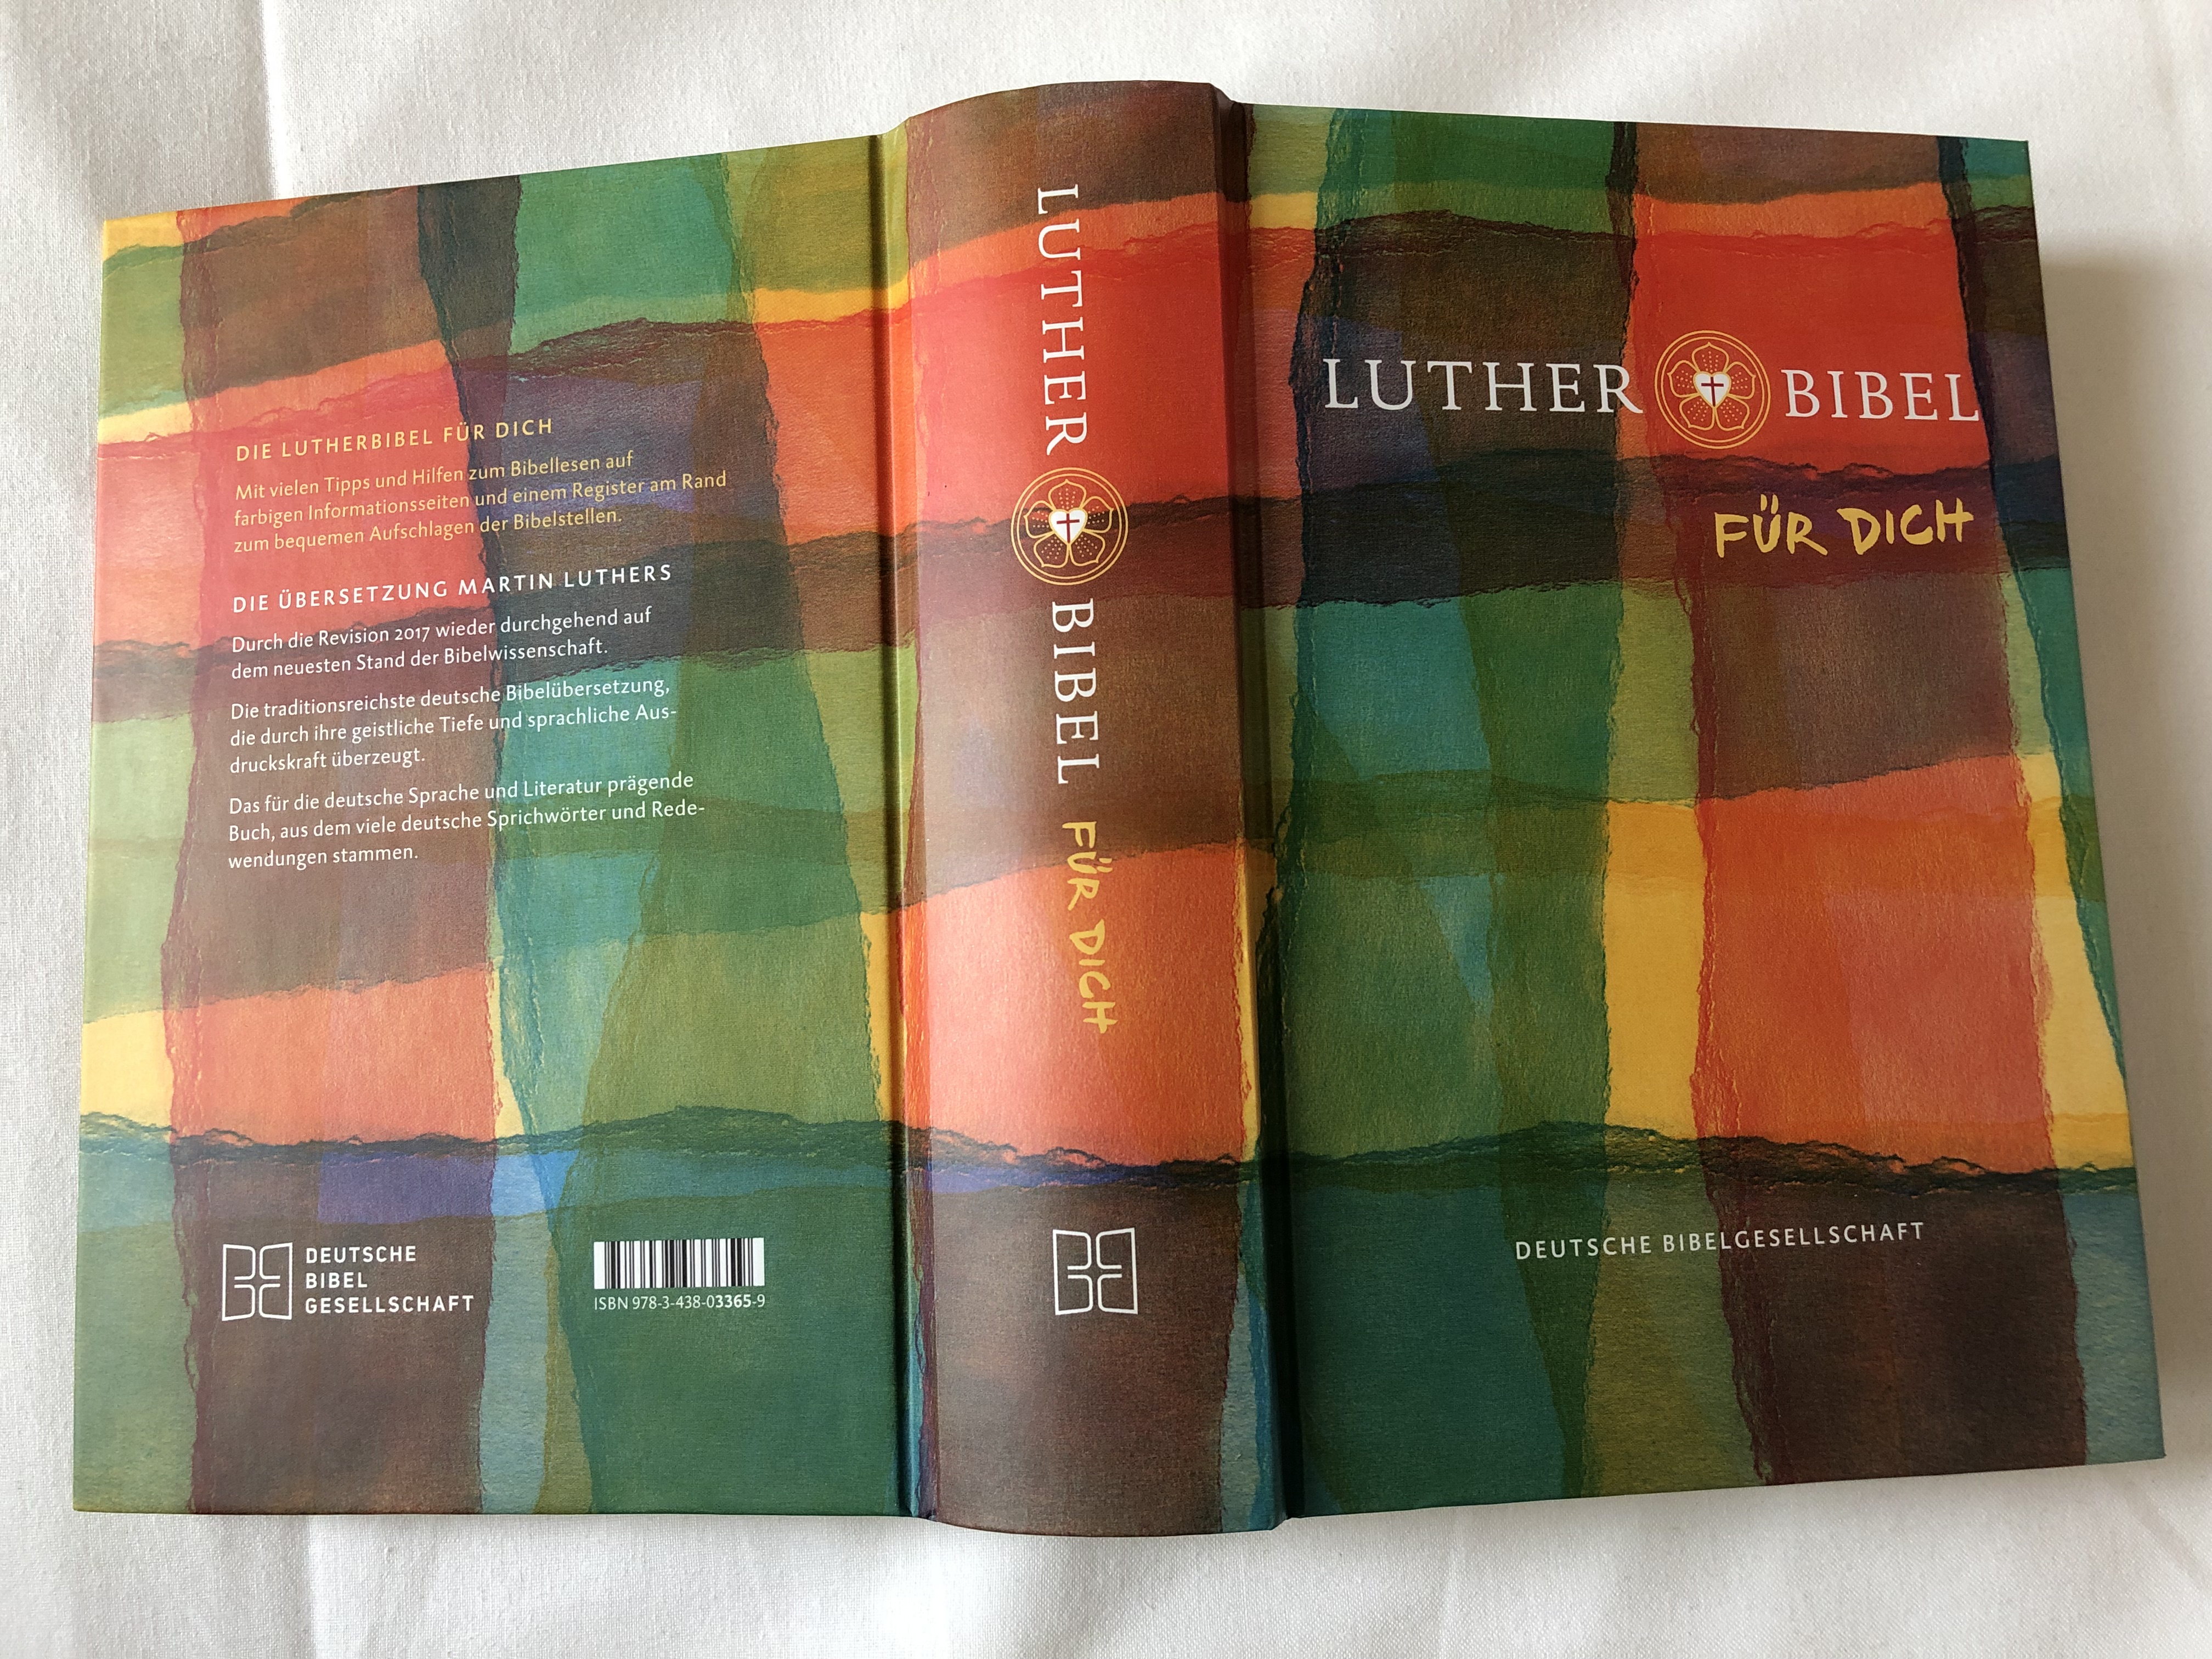 luther-bibel-f-r-dich-luther-bible-for-you-deutsche-bibelgesellschaft-german-language-bible-based-on-martin-luther-s-translation-2017-revision-bible-study-helps-page-index-hardcover-29-.jpg